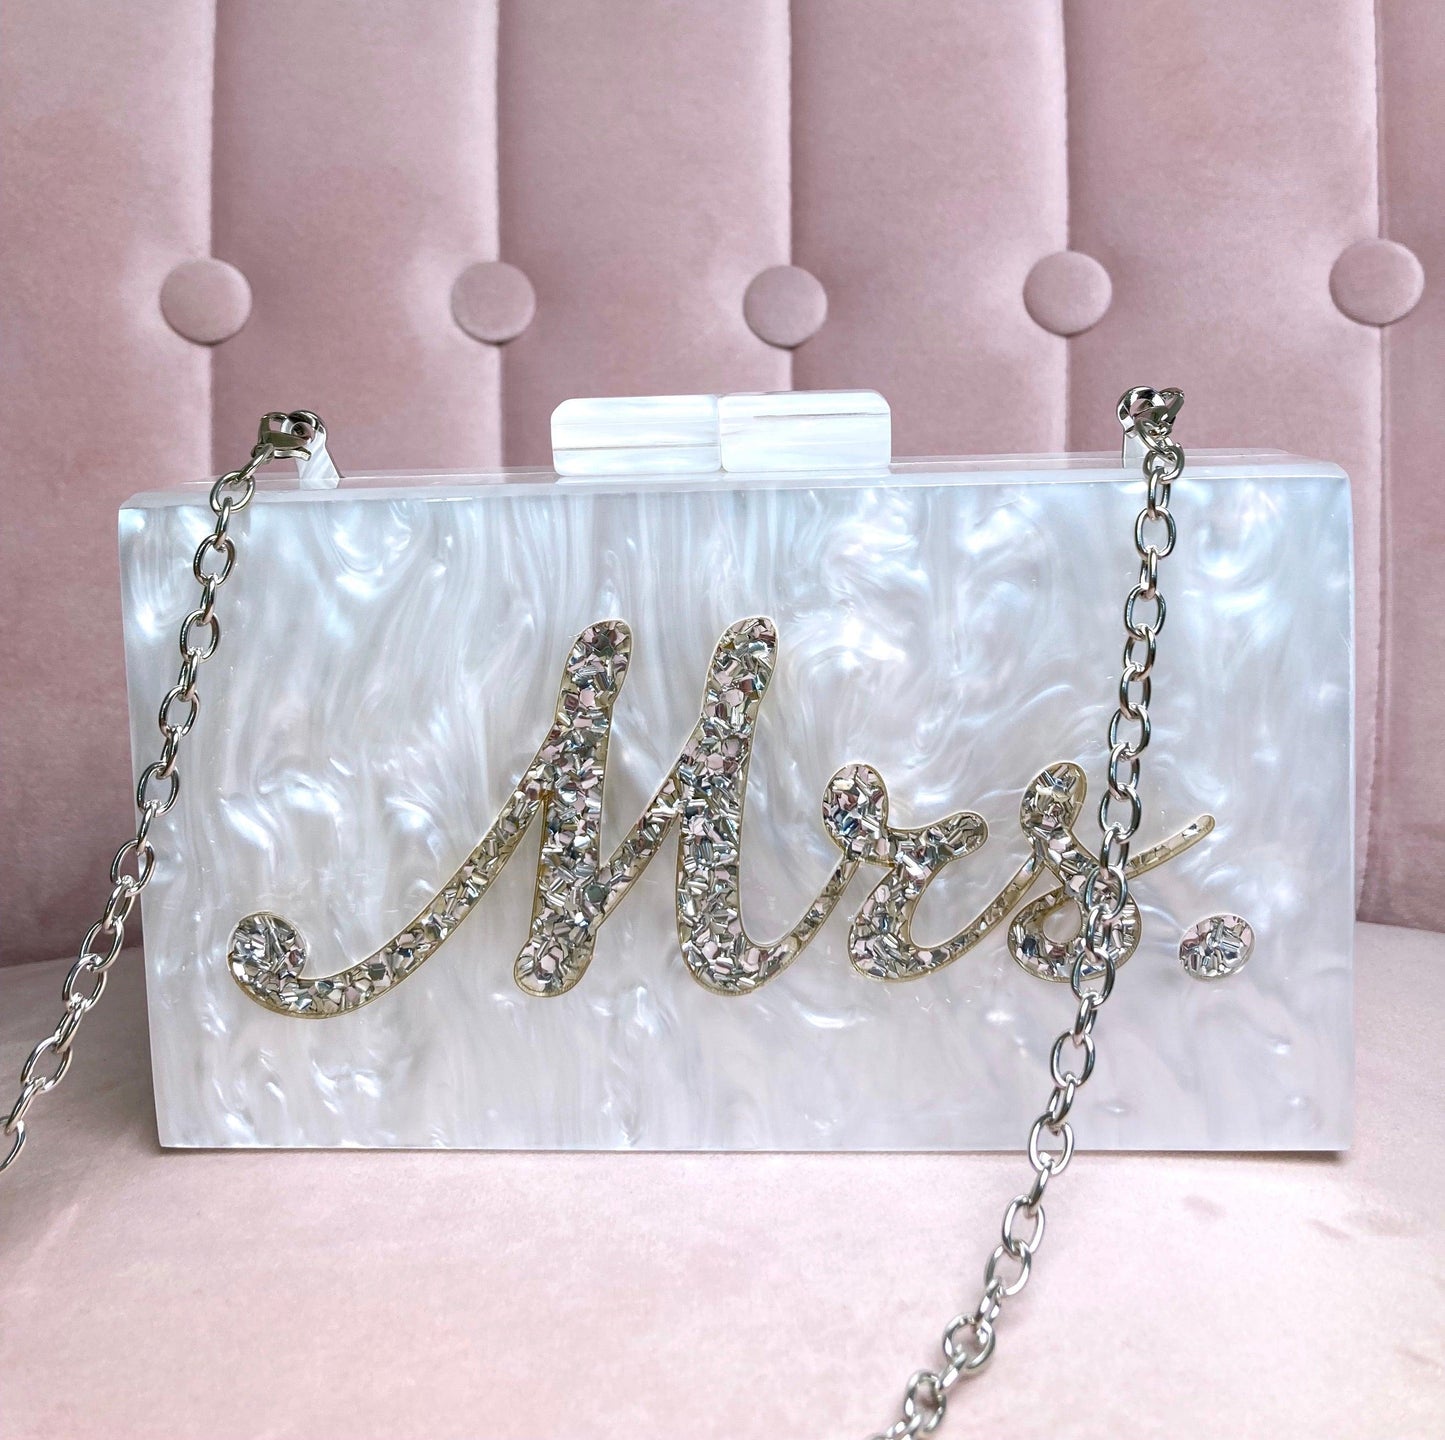 Luxury Pearl Rhinestone Clutch Purse For Wedding For Women Elegant Party  Purse With Hard Metal Box For Weddings And Evening Events Black/Silver  Ladies Handbag From Dressshoesstreet, $25.97 | DHgate.Com